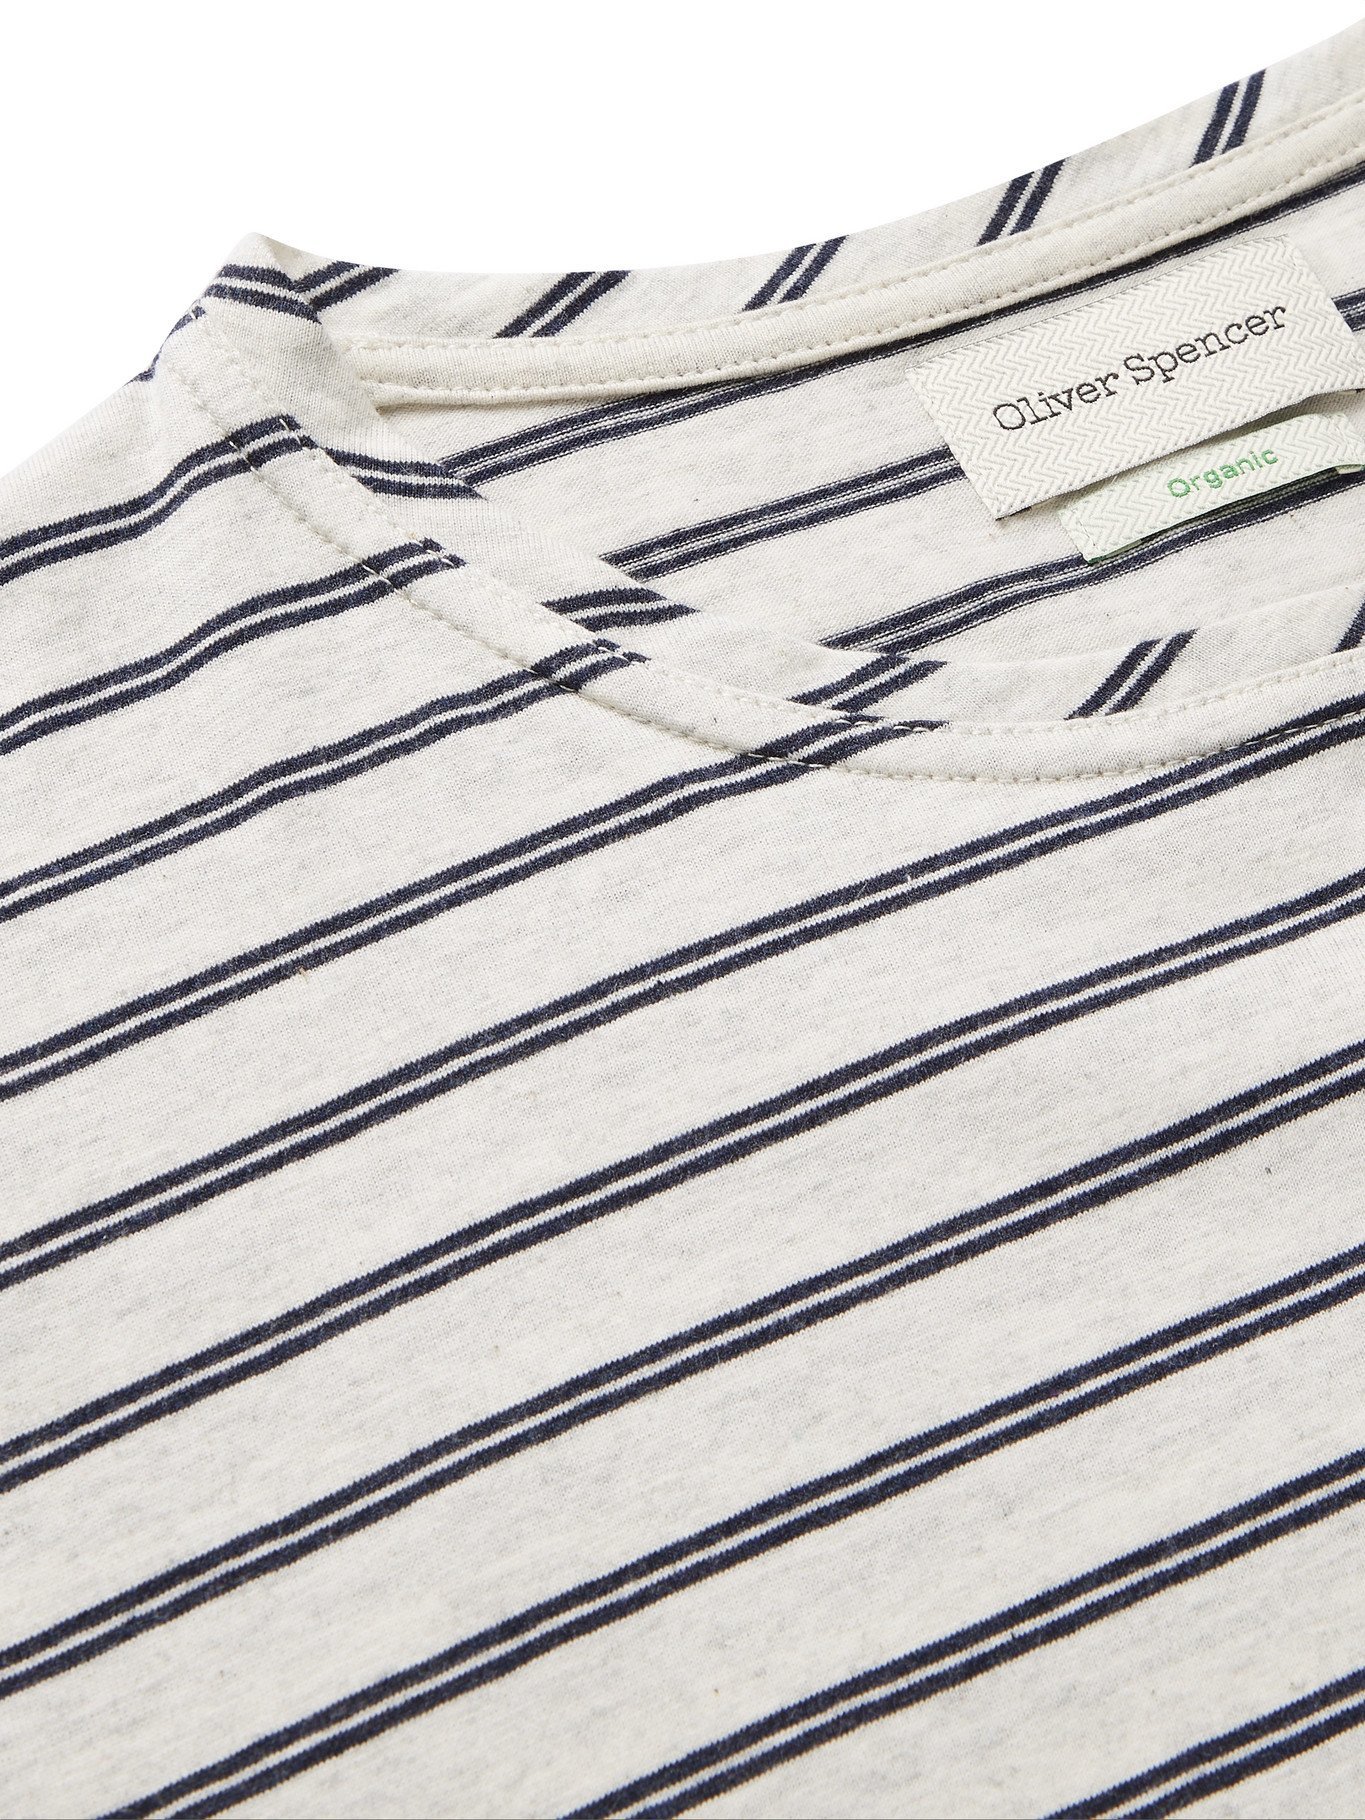 OLIVER SPENCER - Conduit Striped Organic Cotton-Jersey T-Shirt - White